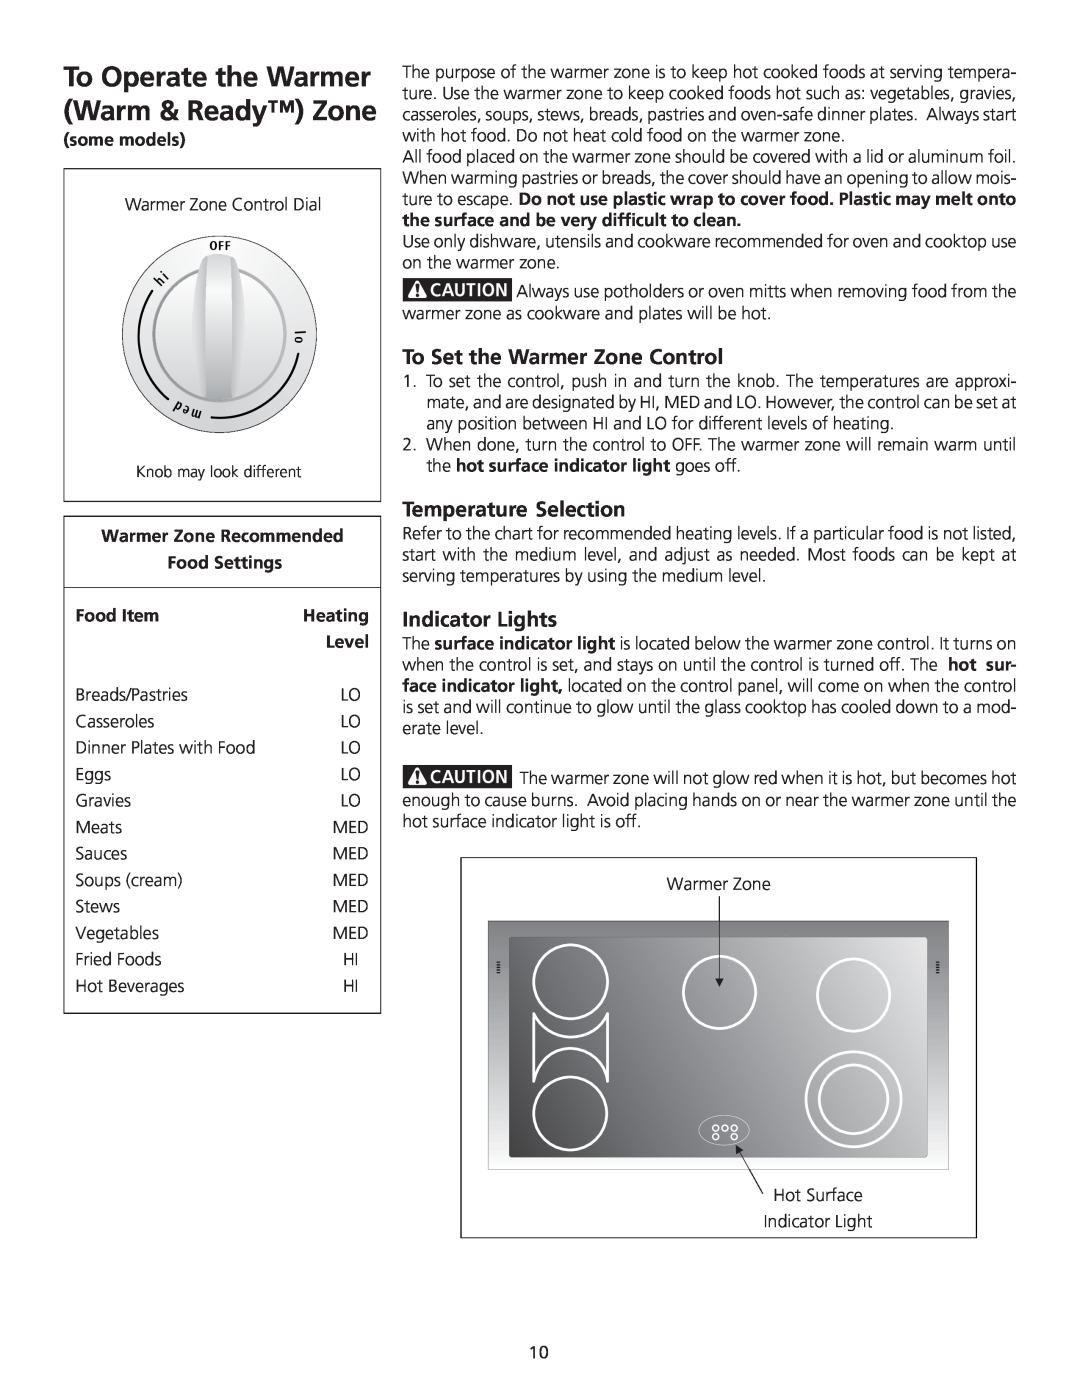 Frigidaire 318200710 To Operate the Warmer Warm & Ready Zone, To Set the Warmer Zone Control, Temperature Selection 